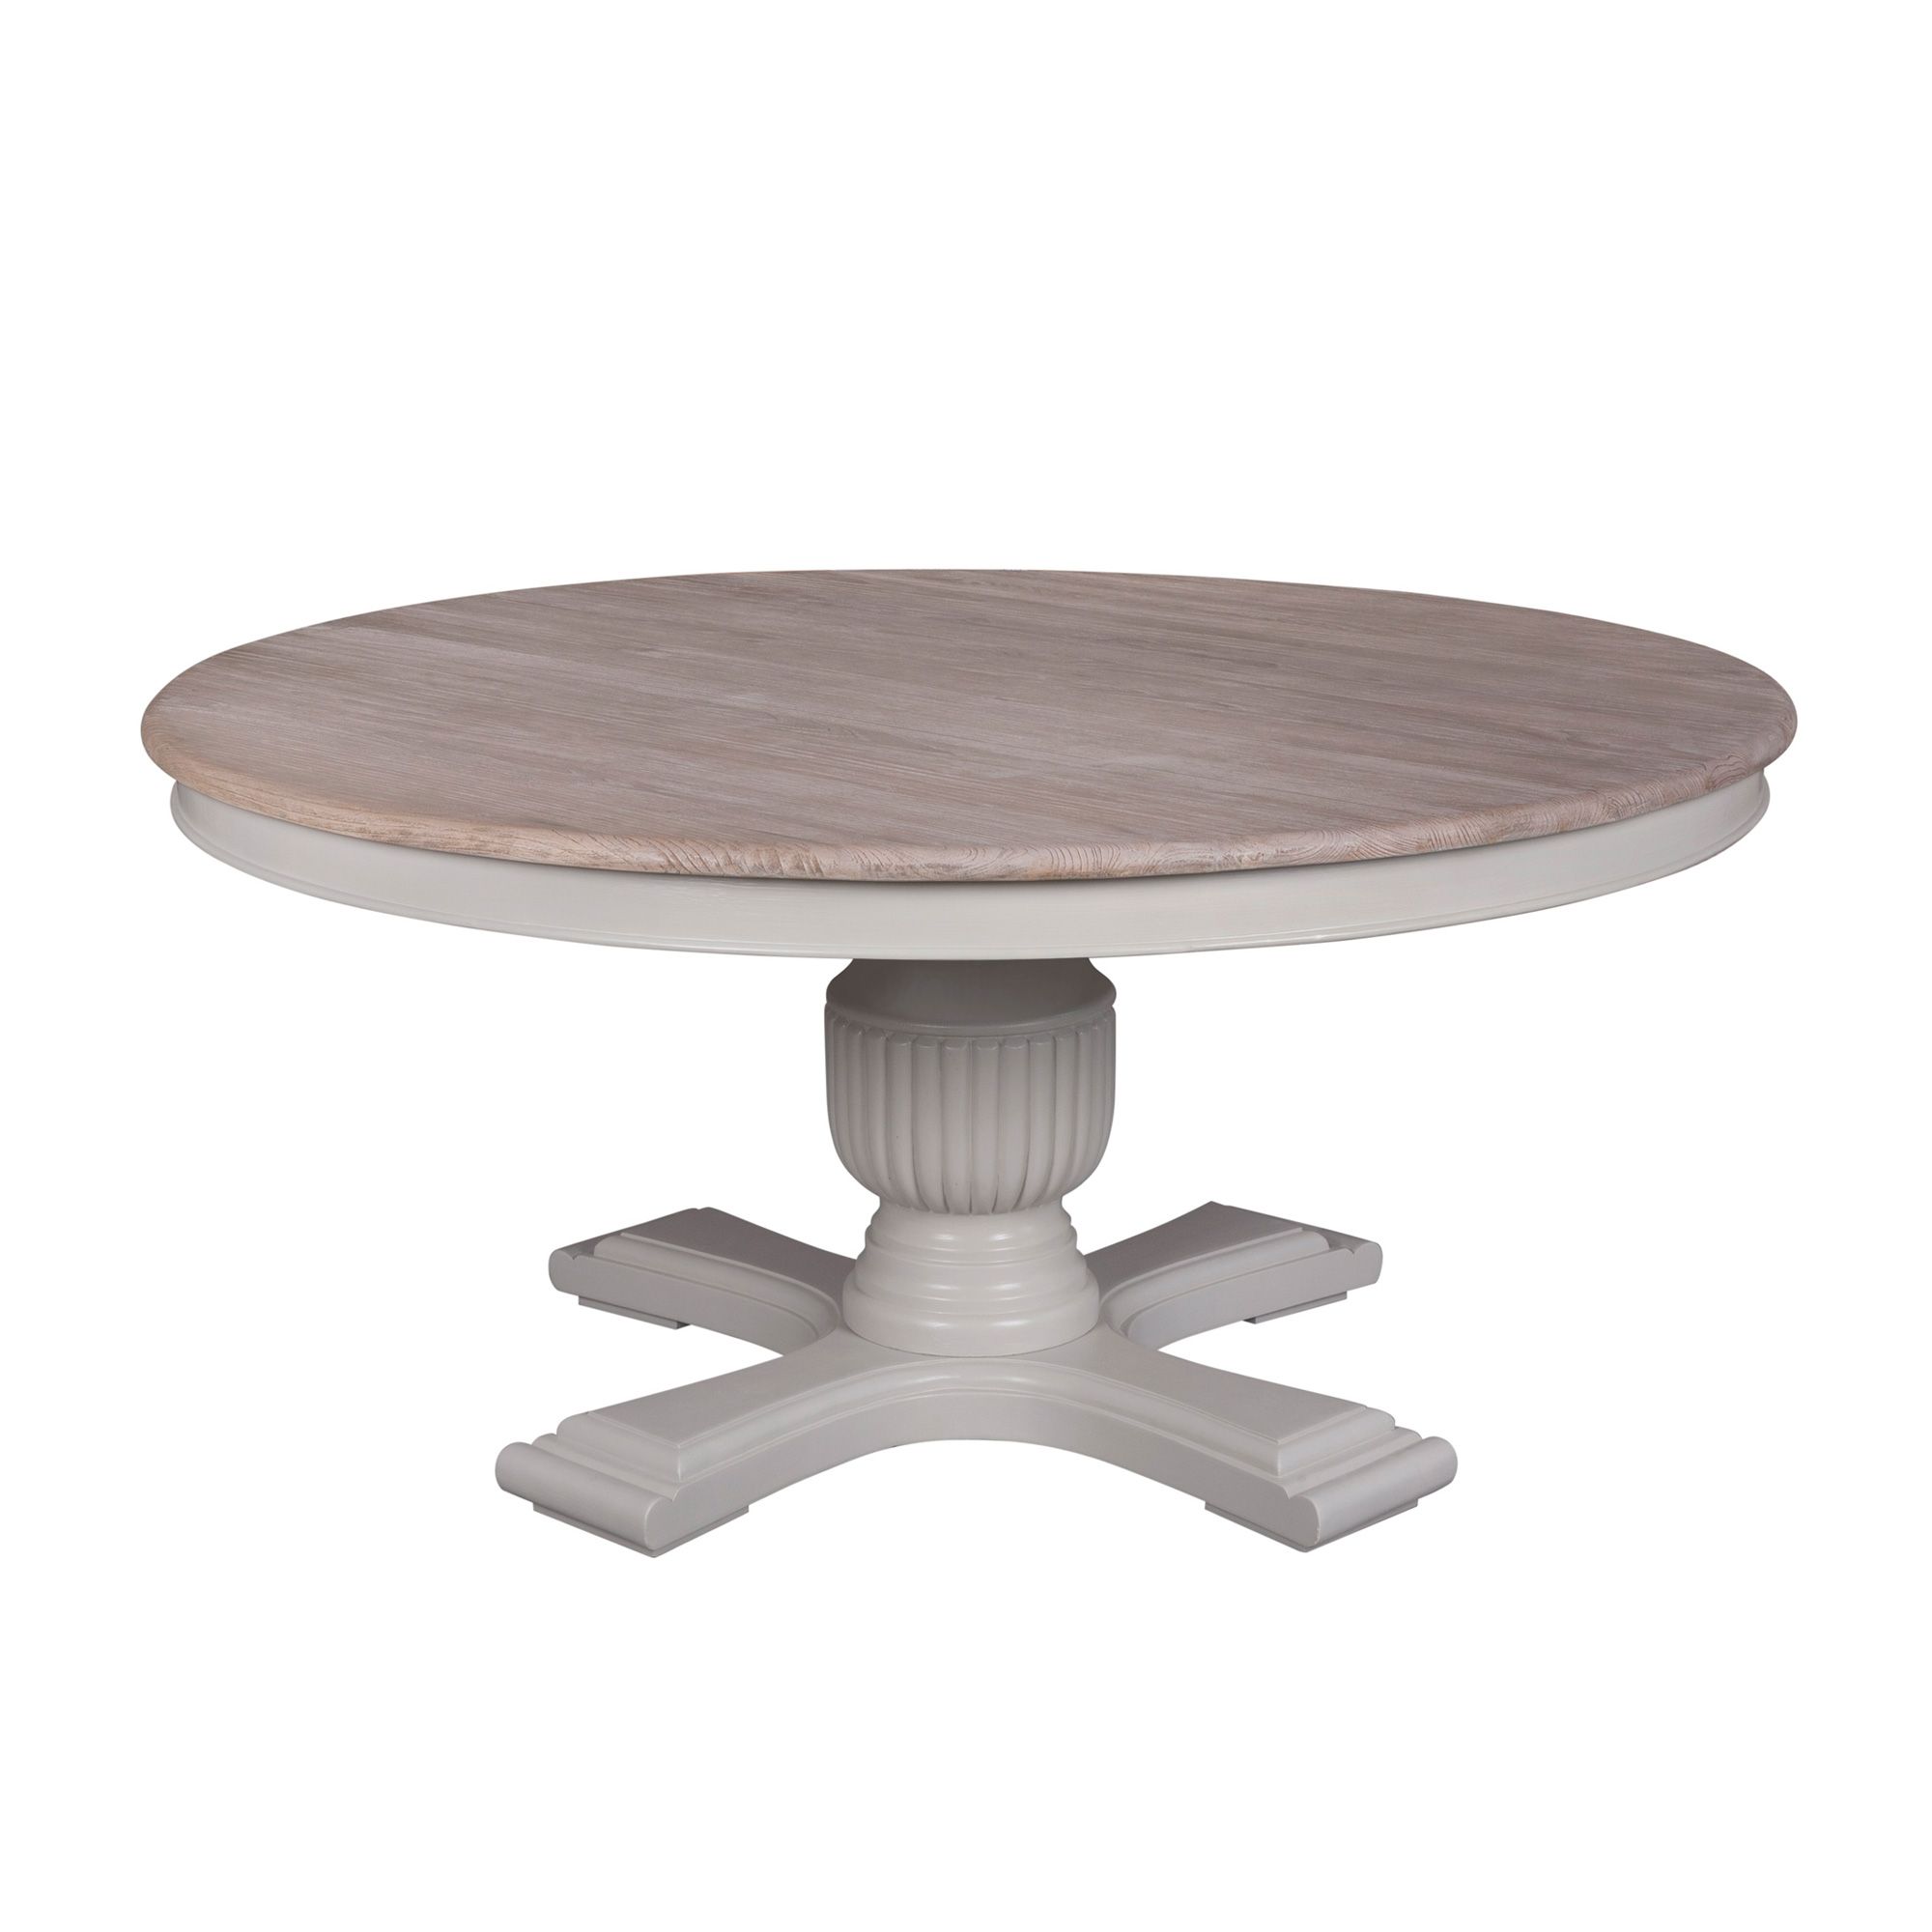 Georgia 6 Person Round Dining Table, 6 Person Round Tables